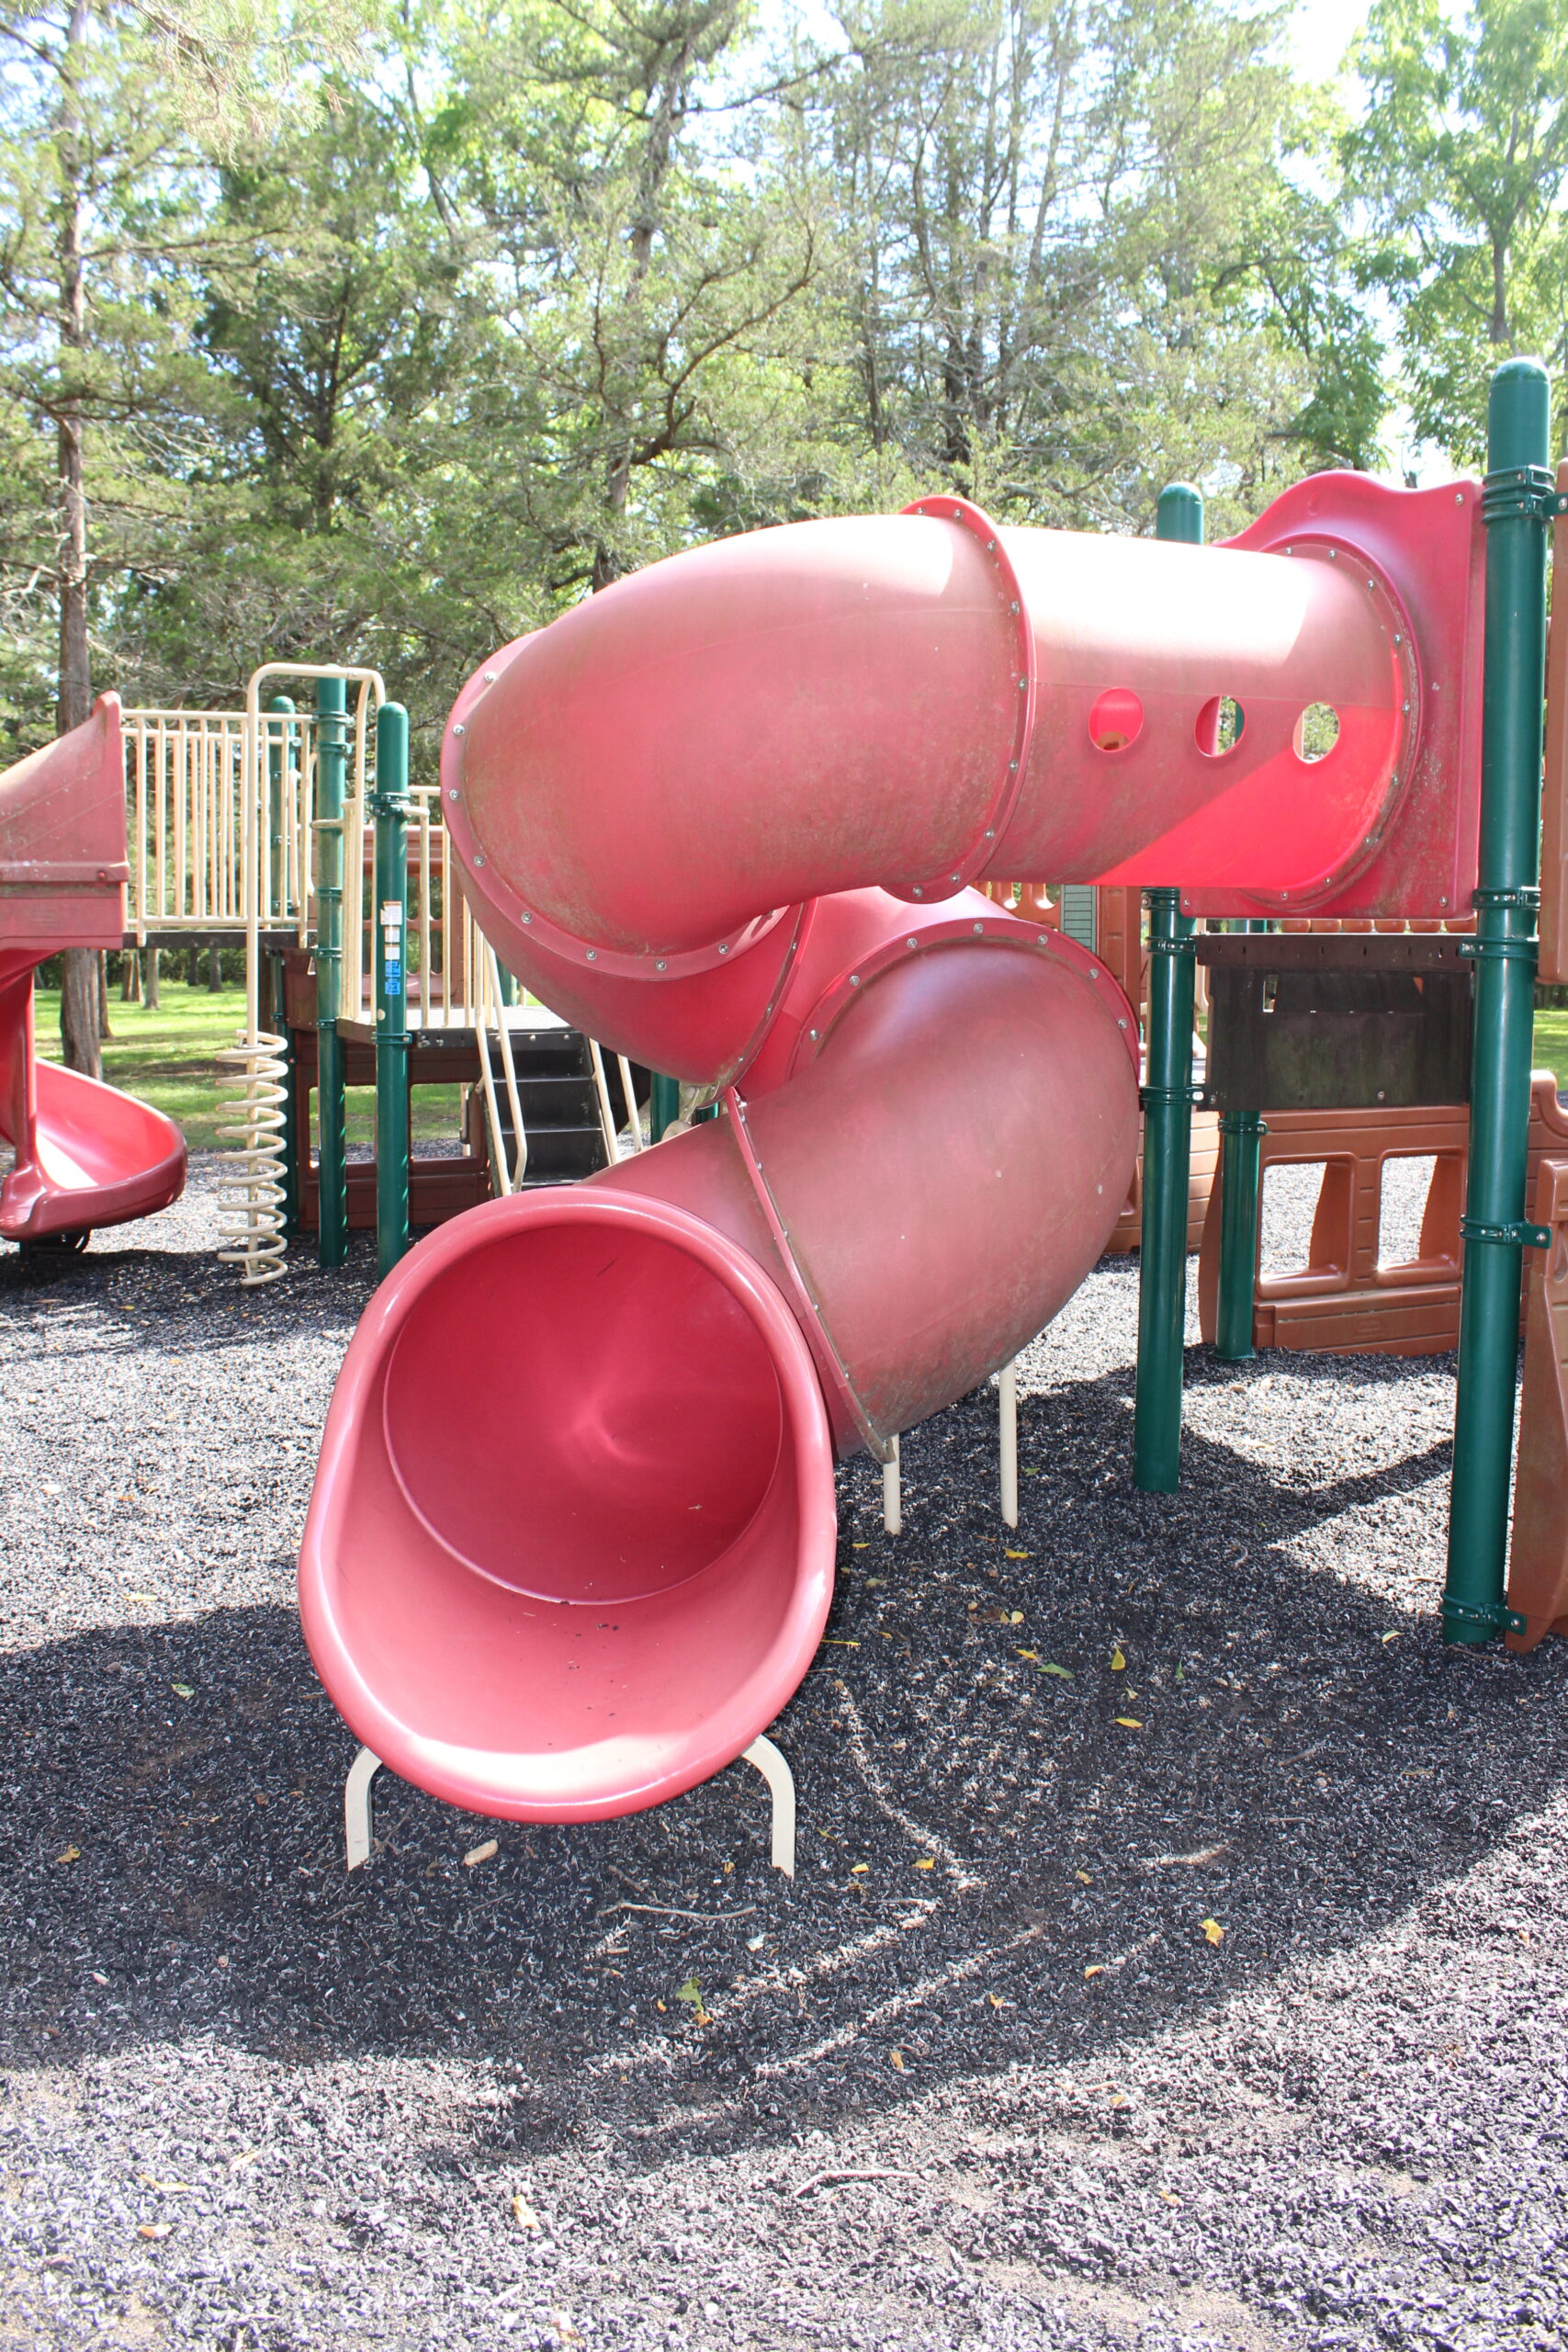 Back Estell Manor Park Playgrounds in Mays Landing NJ - SLIDES - red twisting tunnel slide on pirate ship playground